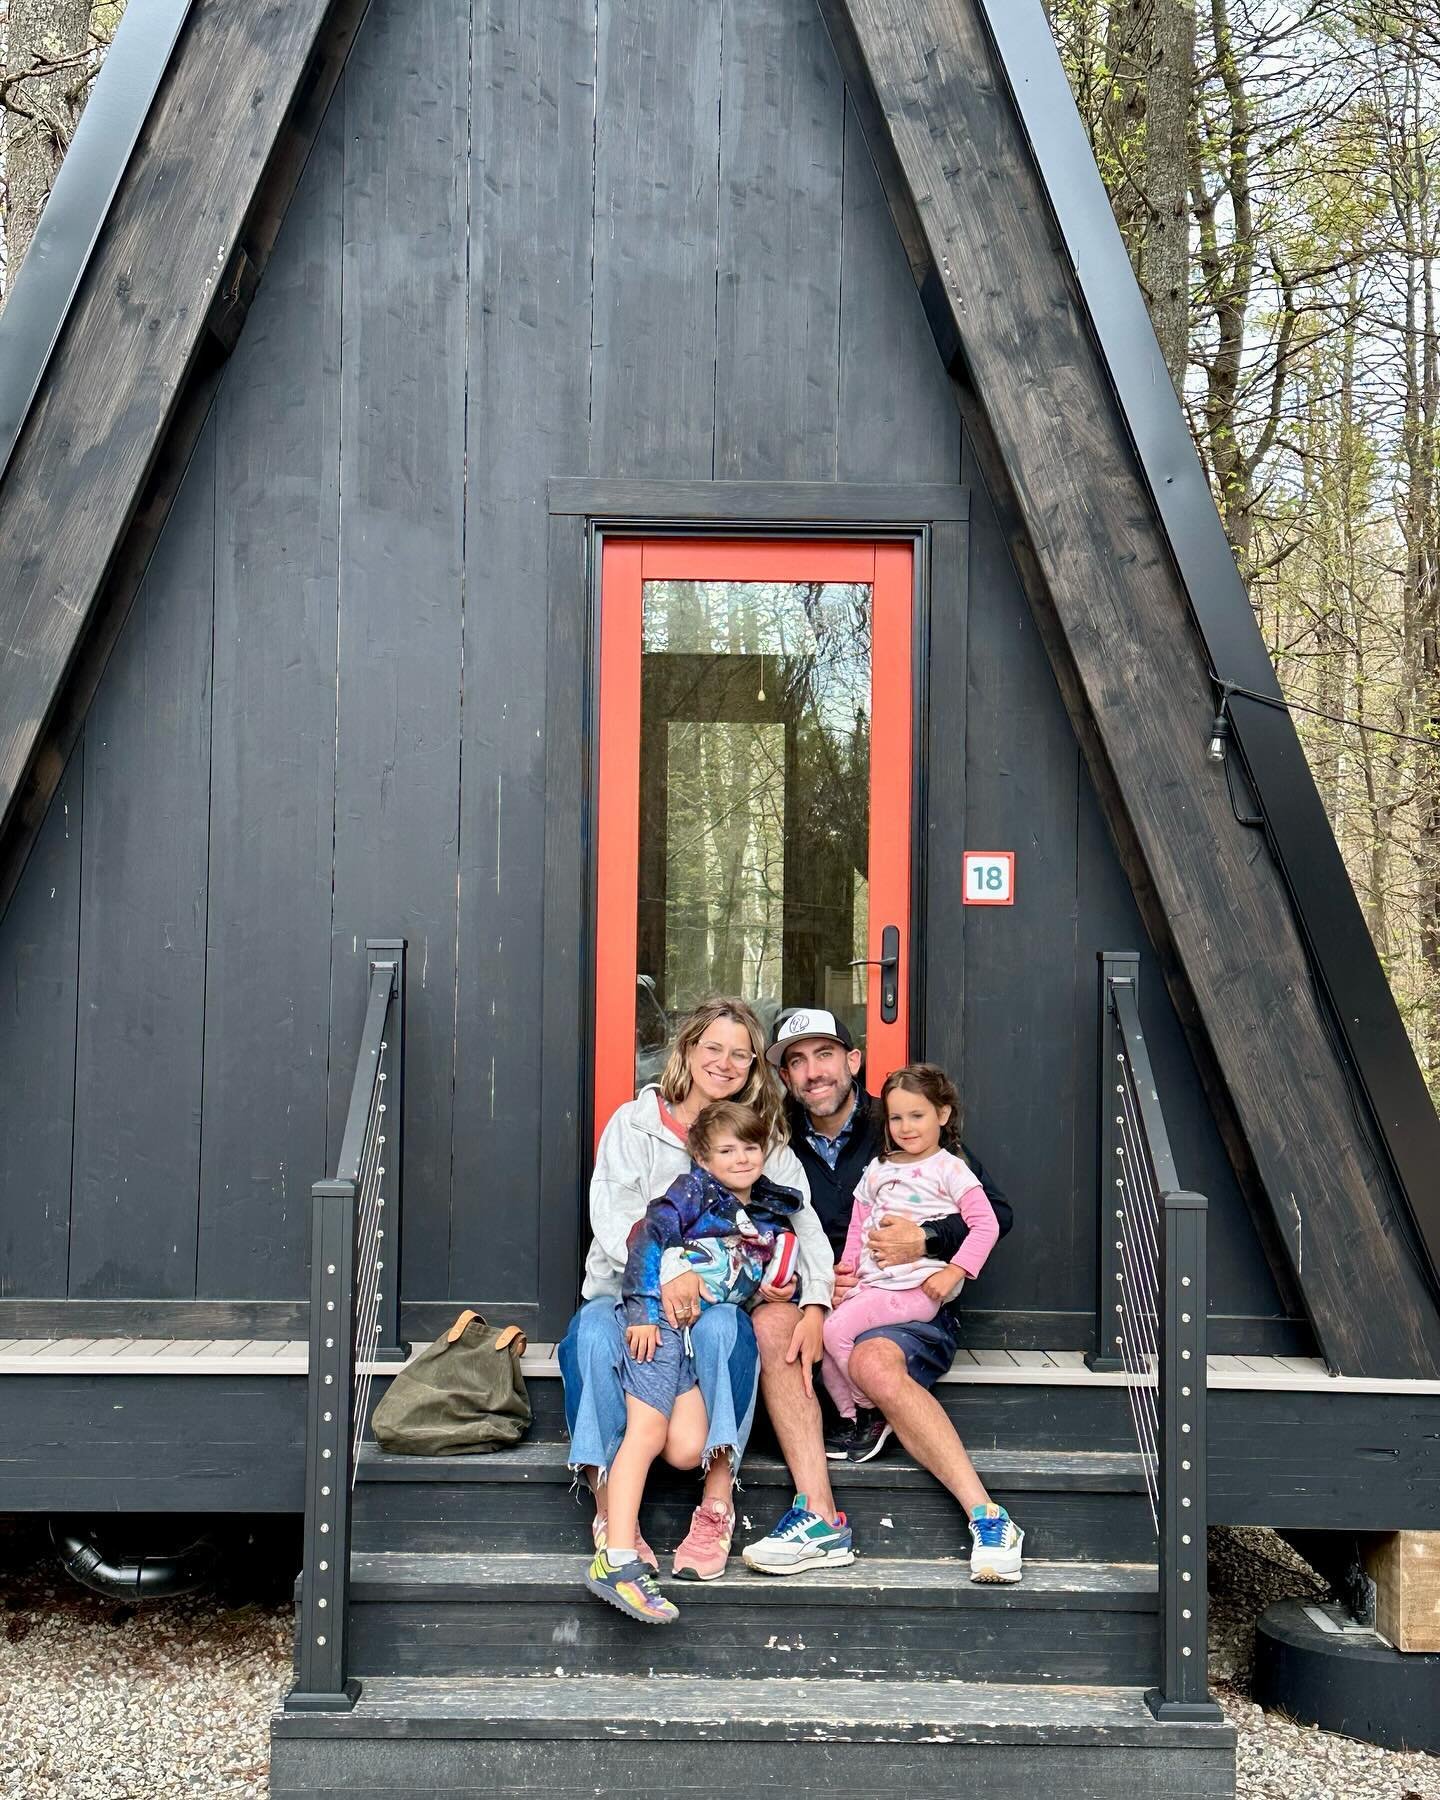 Loving this black A Frame campsite glamping shenanigans at #desertofmaine @desertofmaine  and observing every nook and cranny on how to build this sucker and make our A frame dreams a reality. Plus the smart ways to utilize a small space. This place 